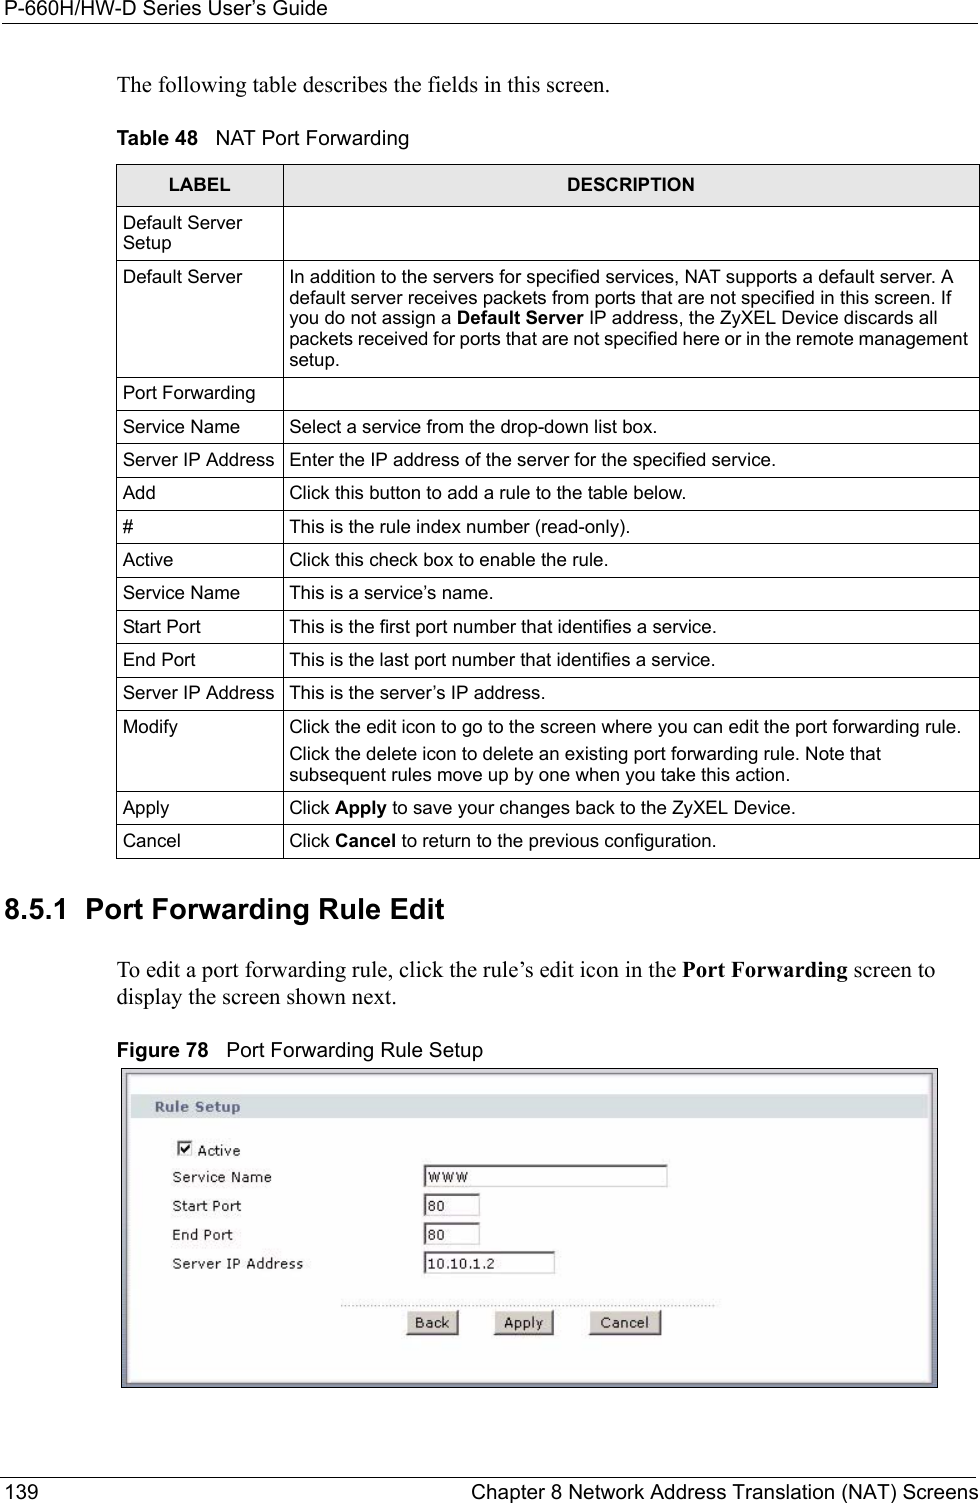 P-660H/HW-D Series User’s Guide139 Chapter 8 Network Address Translation (NAT) ScreensThe following table describes the fields in this screen. 8.5.1  Port Forwarding Rule Edit To edit a port forwarding rule, click the rule’s edit icon in the Port Forwarding screen to display the screen shown next.  Figure 78   Port Forwarding Rule Setup  Table 48   NAT Port ForwardingLABEL DESCRIPTIONDefault Server SetupDefault Server In addition to the servers for specified services, NAT supports a default server. A default server receives packets from ports that are not specified in this screen. If you do not assign a Default Server IP address, the ZyXEL Device discards all packets received for ports that are not specified here or in the remote management setup.Port ForwardingService Name Select a service from the drop-down list box.Server IP Address Enter the IP address of the server for the specified service.Add Click this button to add a rule to the table below.#This is the rule index number (read-only).Active Click this check box to enable the rule.Service Name This is a service’s name.Start Port  This is the first port number that identifies a service.End Port  This is the last port number that identifies a service.Server IP Address This is the server’s IP address.Modify Click the edit icon to go to the screen where you can edit the port forwarding rule.Click the delete icon to delete an existing port forwarding rule. Note that subsequent rules move up by one when you take this action.Apply Click Apply to save your changes back to the ZyXEL Device.Cancel Click Cancel to return to the previous configuration.